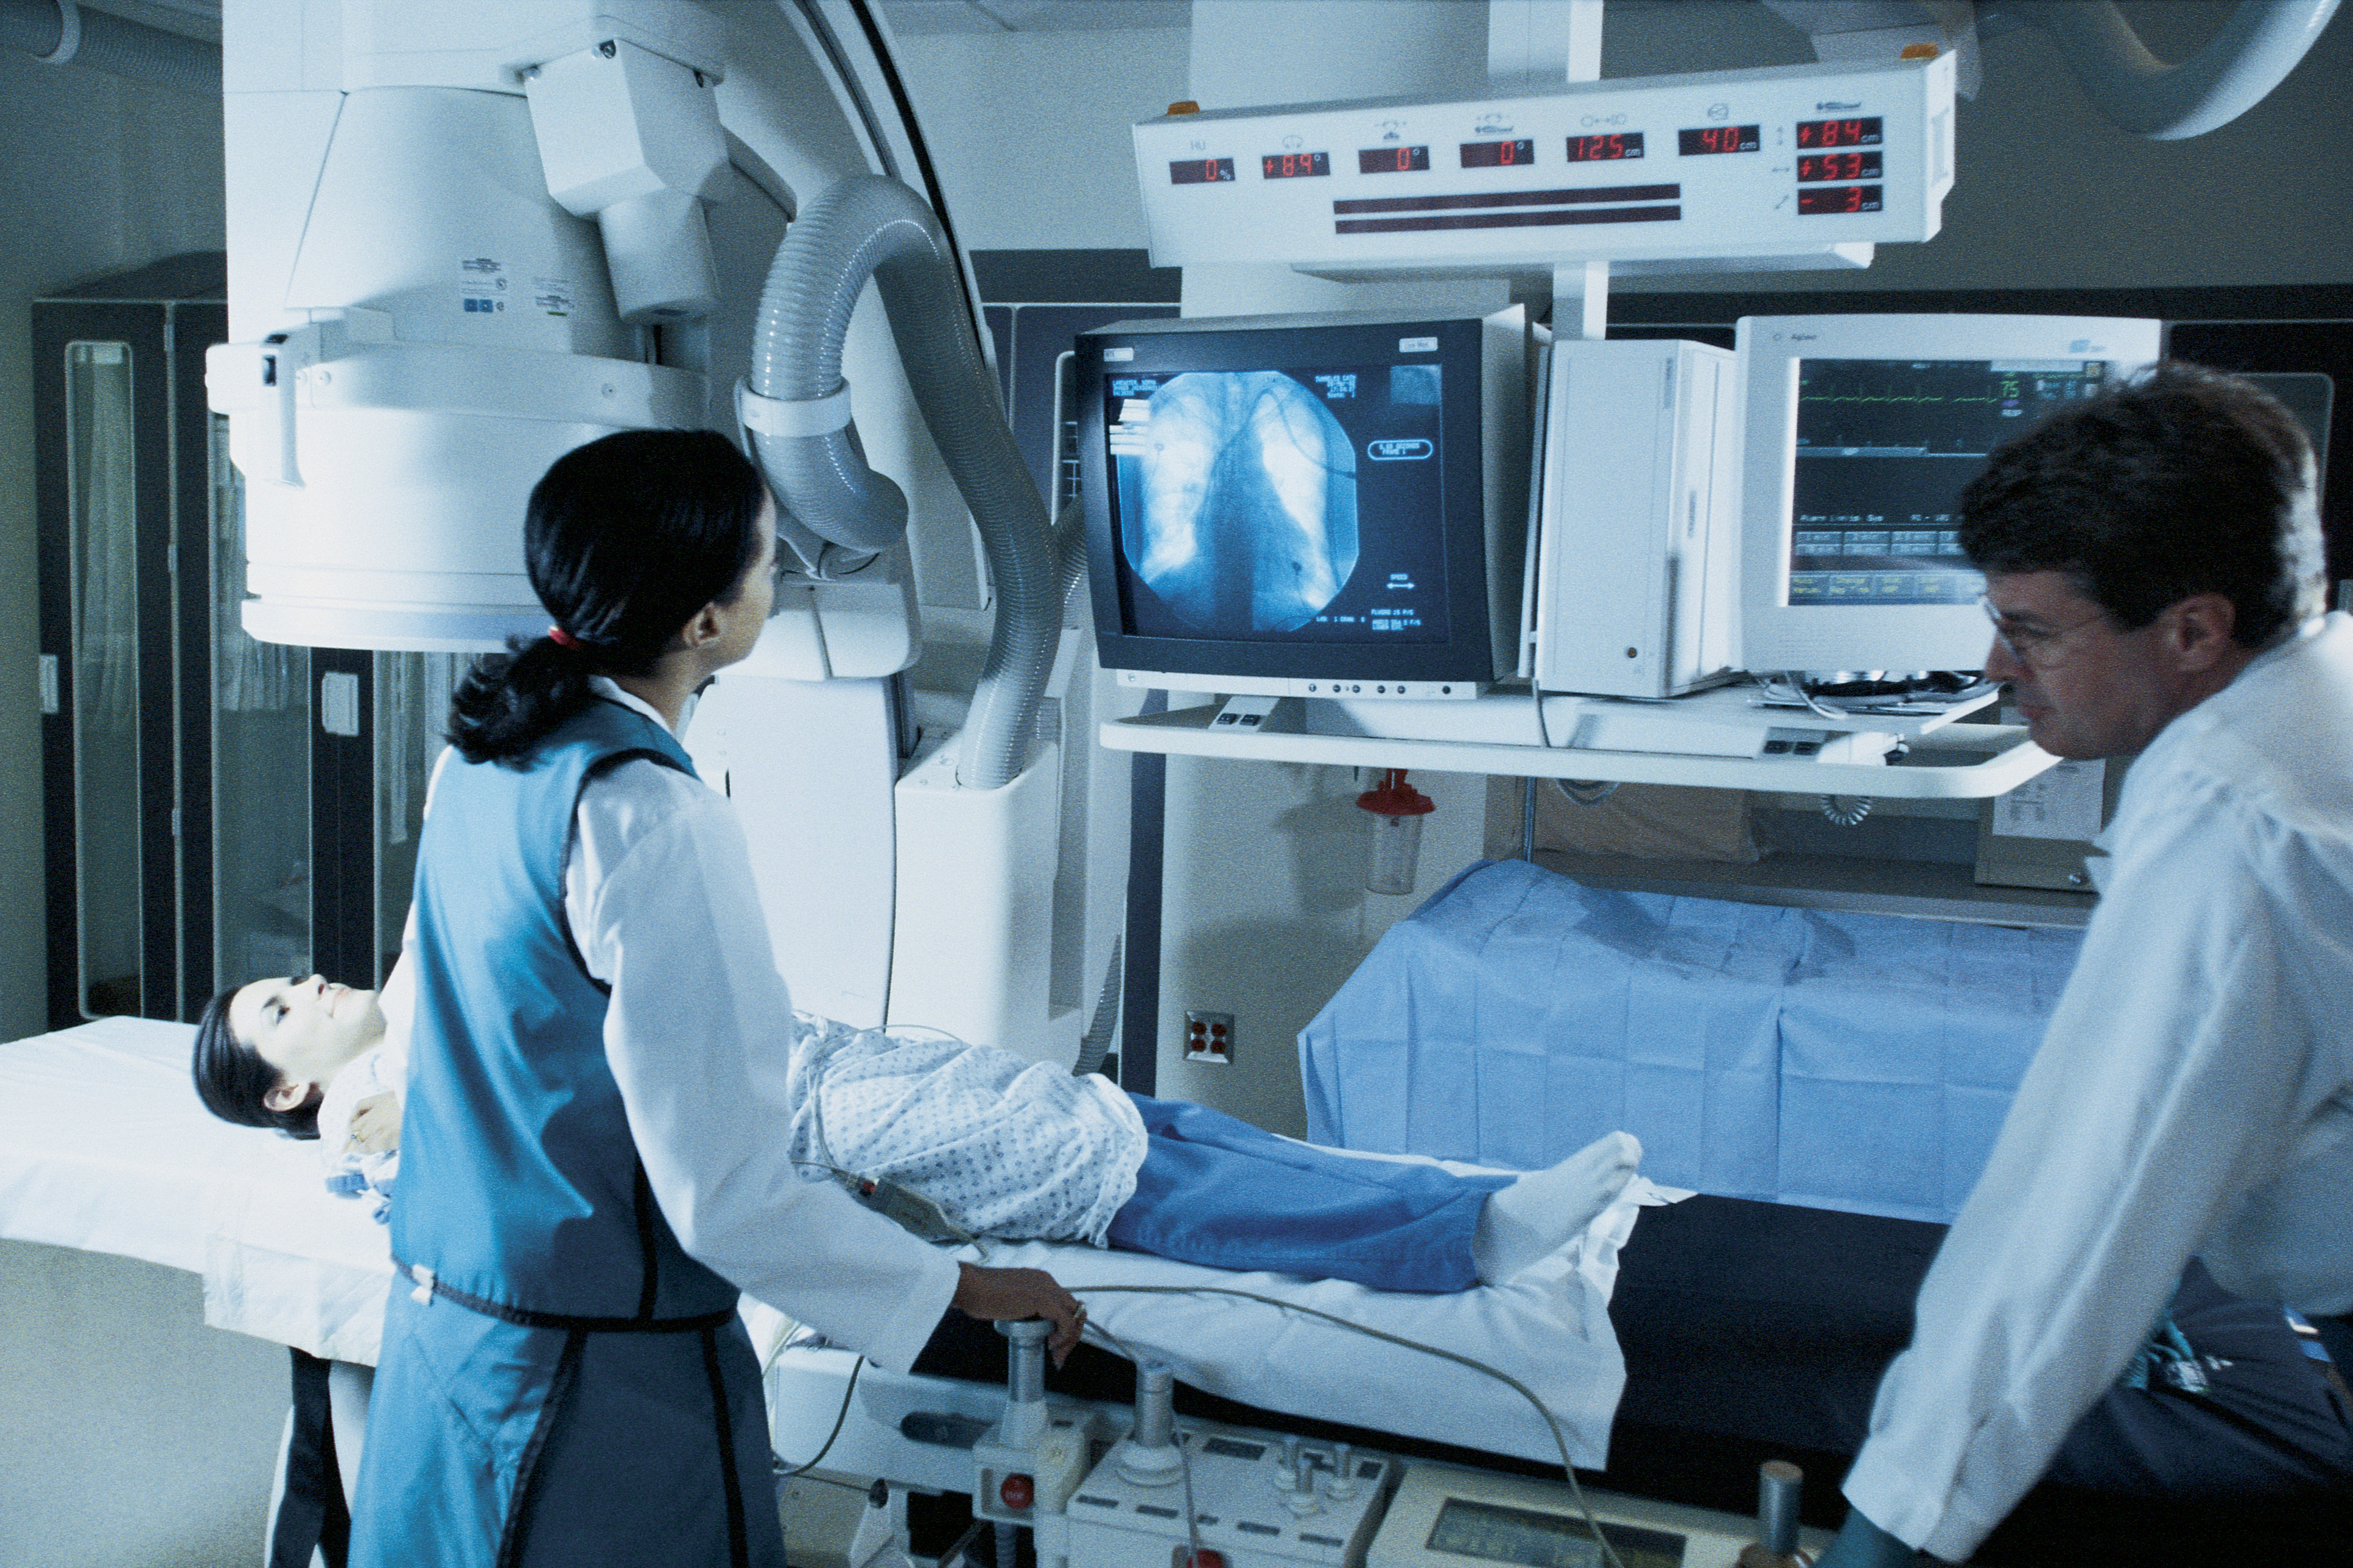 21 CFR 820 and ISO 13485 — Harmonized Quality System Requirements for Medical Devices